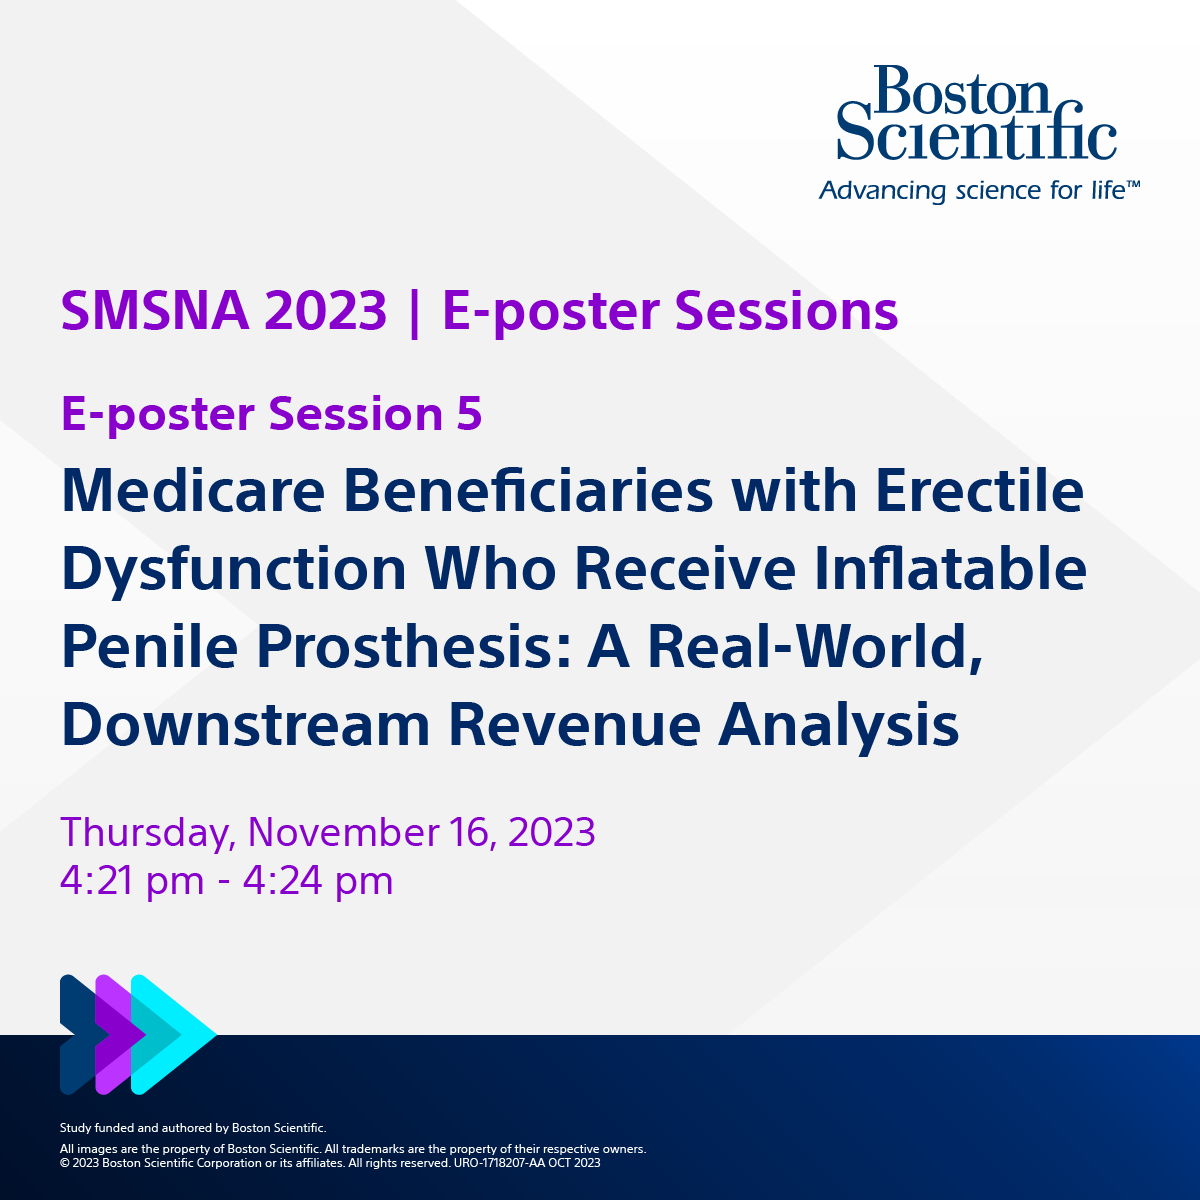 Tomorrow at #SMSNA23! Don’t miss this e-poster session presented by @AndrewSunMD. Excited to support this research co-authored by our health economics team.